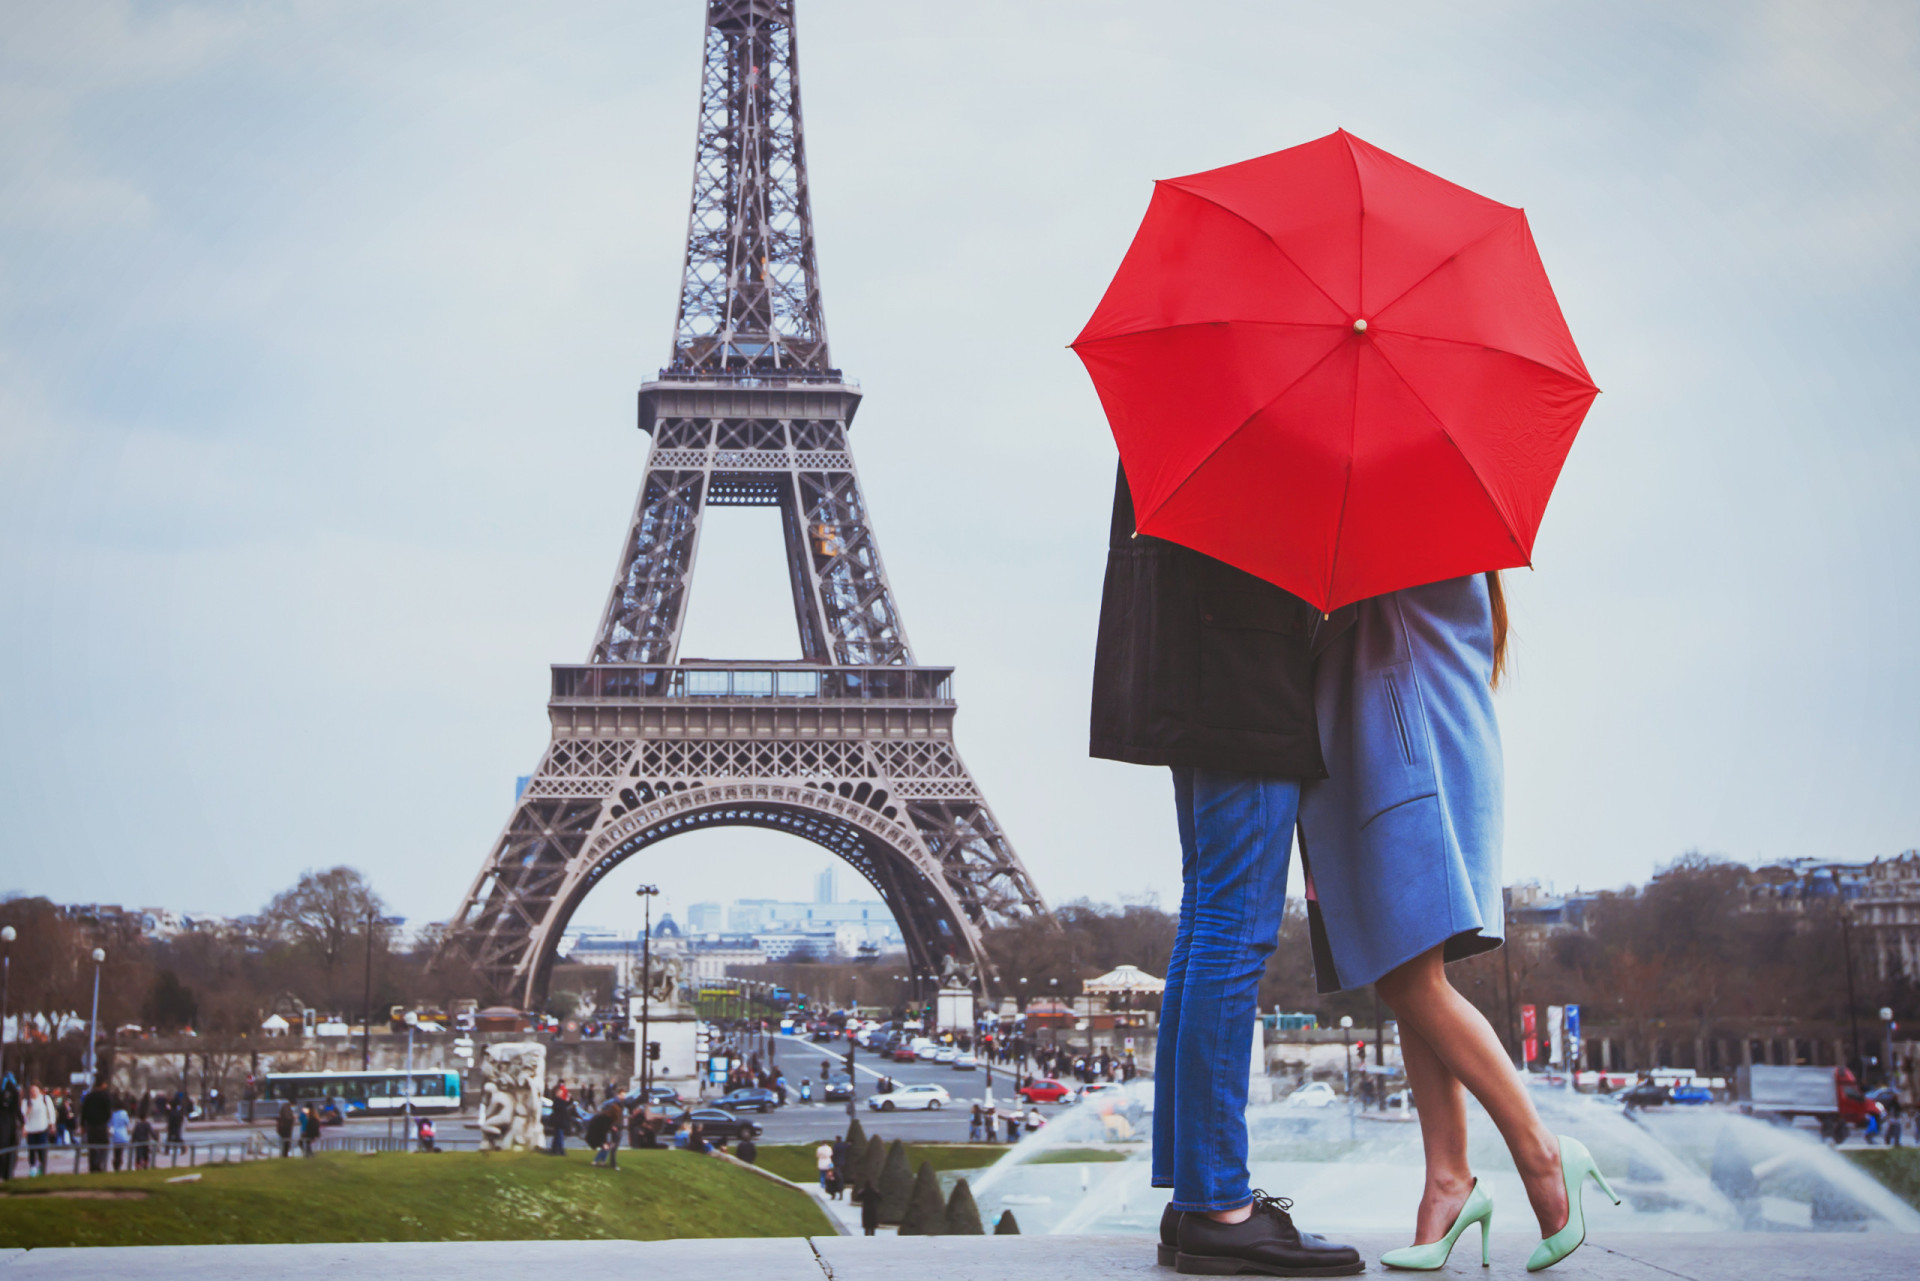 <p>Often dubbed as the city of love and romance, you might notice that it isn't all that romantic when you leave the astonishing monuments and picturesque streets behind.</p><p><a href="https://www.msn.com/en-us/community/channel/vid-7xx8mnucu55yw63we9va2gwr7uihbxwc68fxqp25x6tg4ftibpra?cvid=94631541bc0f4f89bfd59158d696ad7e">Follow us and access great exclusive content every day</a></p>